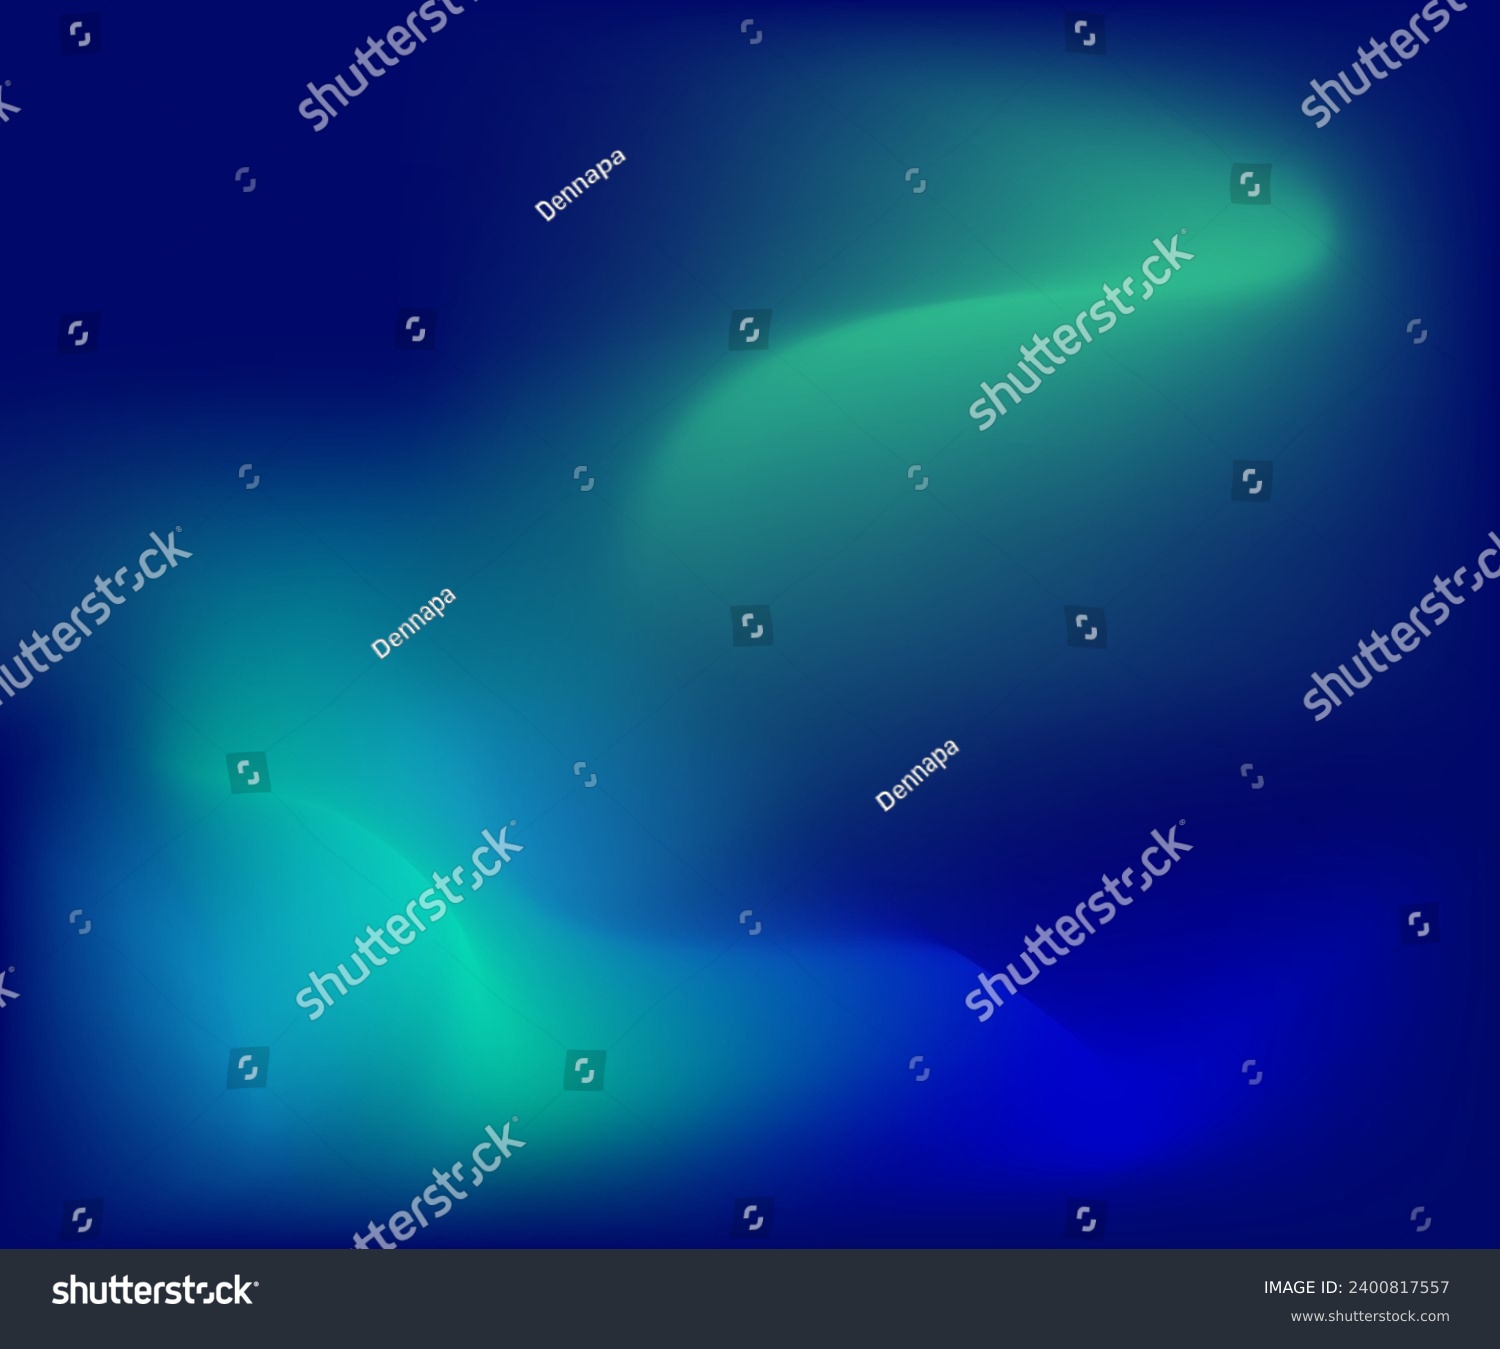 Blue green gradient abstract background.Vector illustration. #2400817557